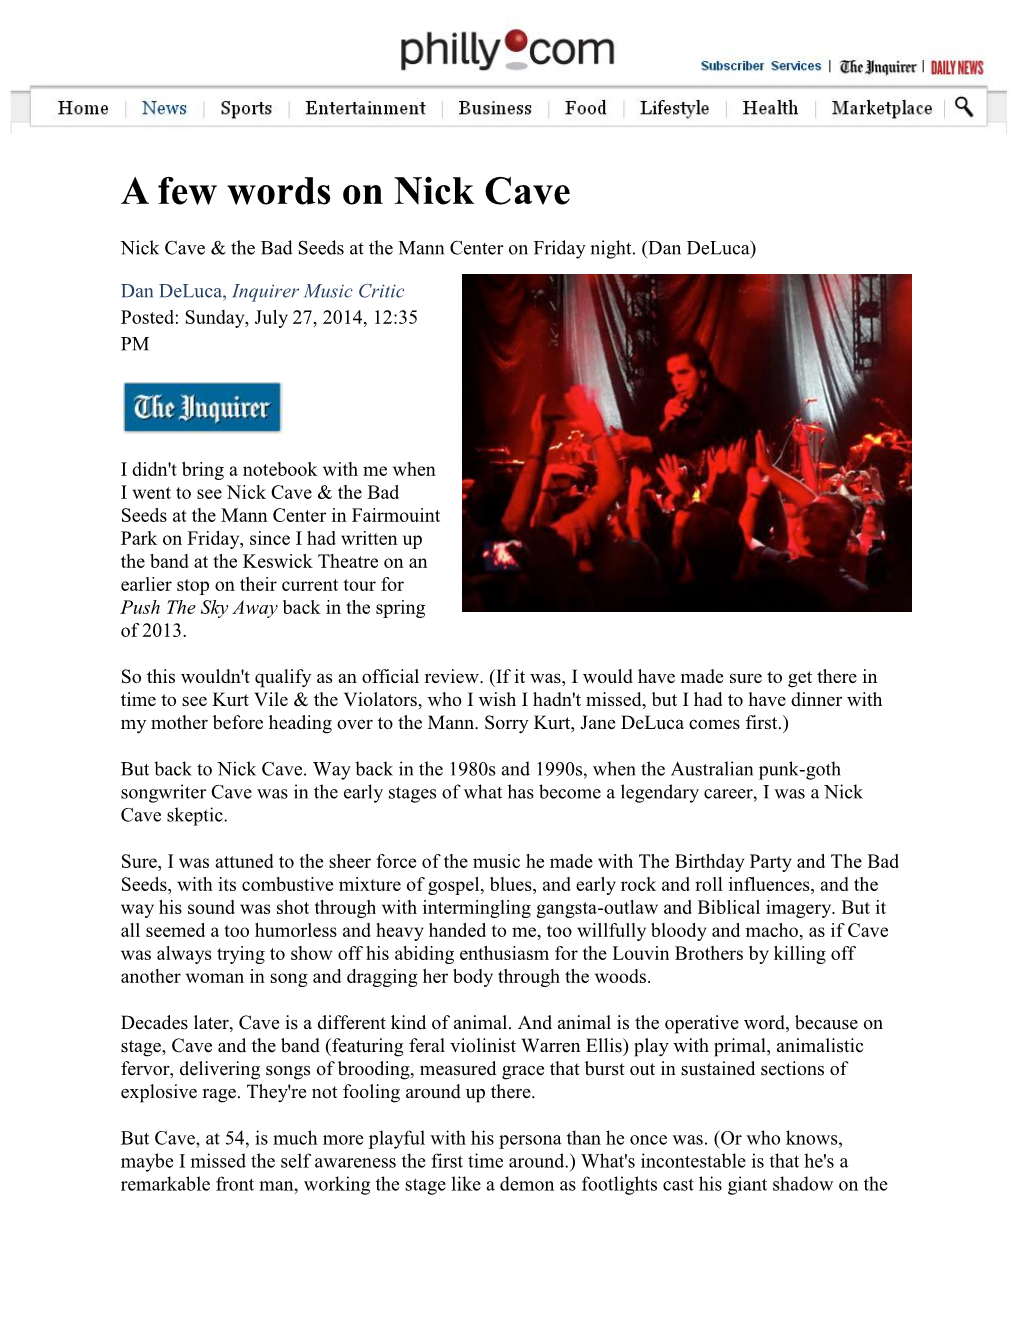 A Few Words on Nick Cave